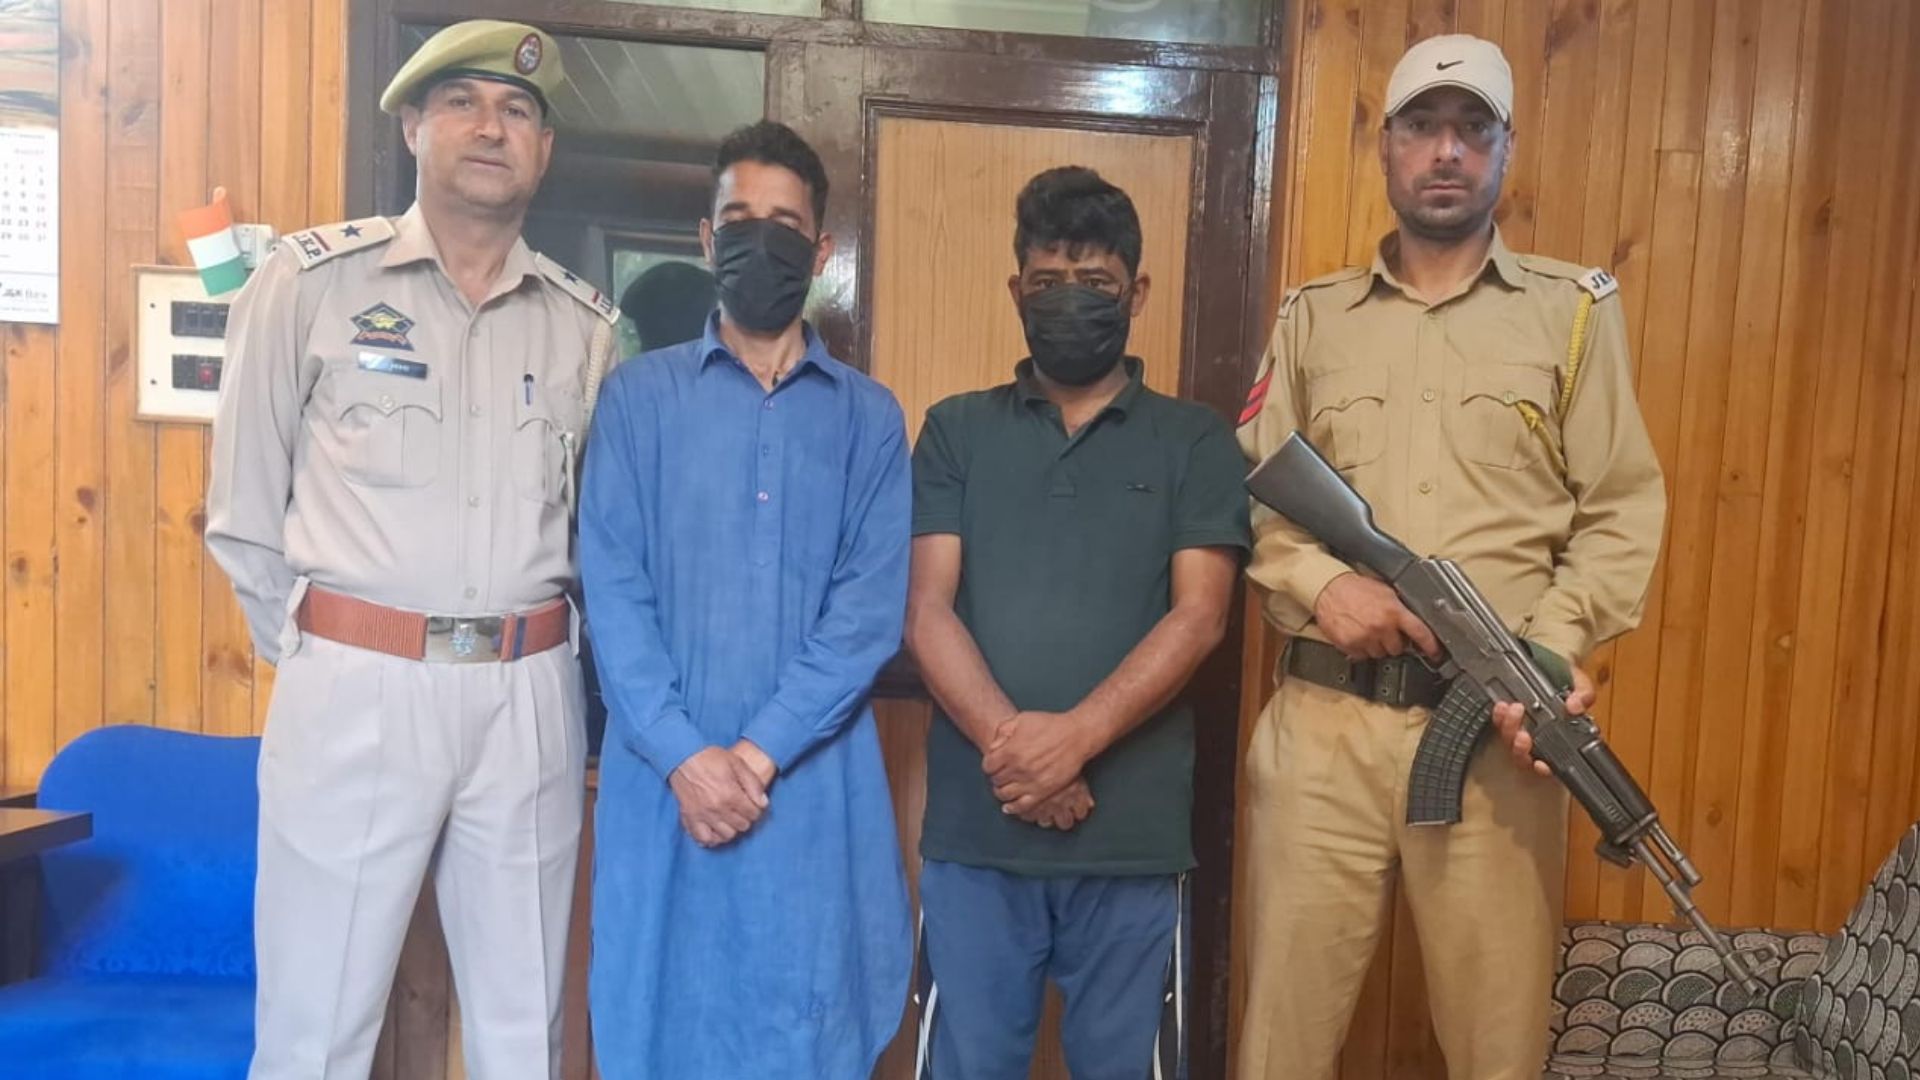 Baramulla Police Crack Down on Human Trafficking: Two More Arrests, Three Minors Rescued